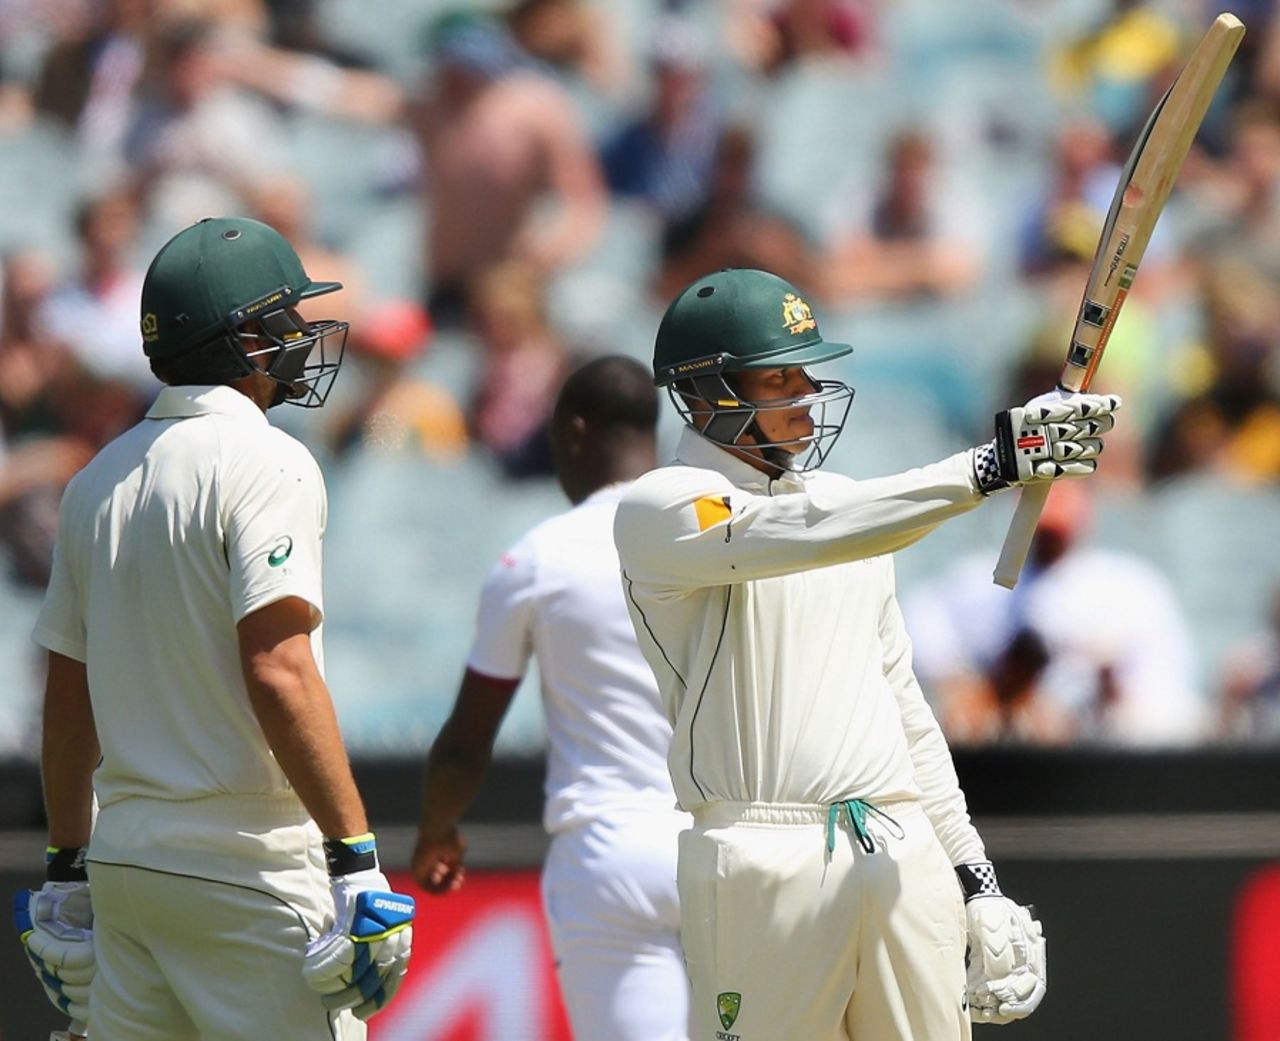 Usman Khawaja raises his bat after completing his fifty , Australia v West Indies, 2nd Test, 1st day, Melbourne, December 26, 2015